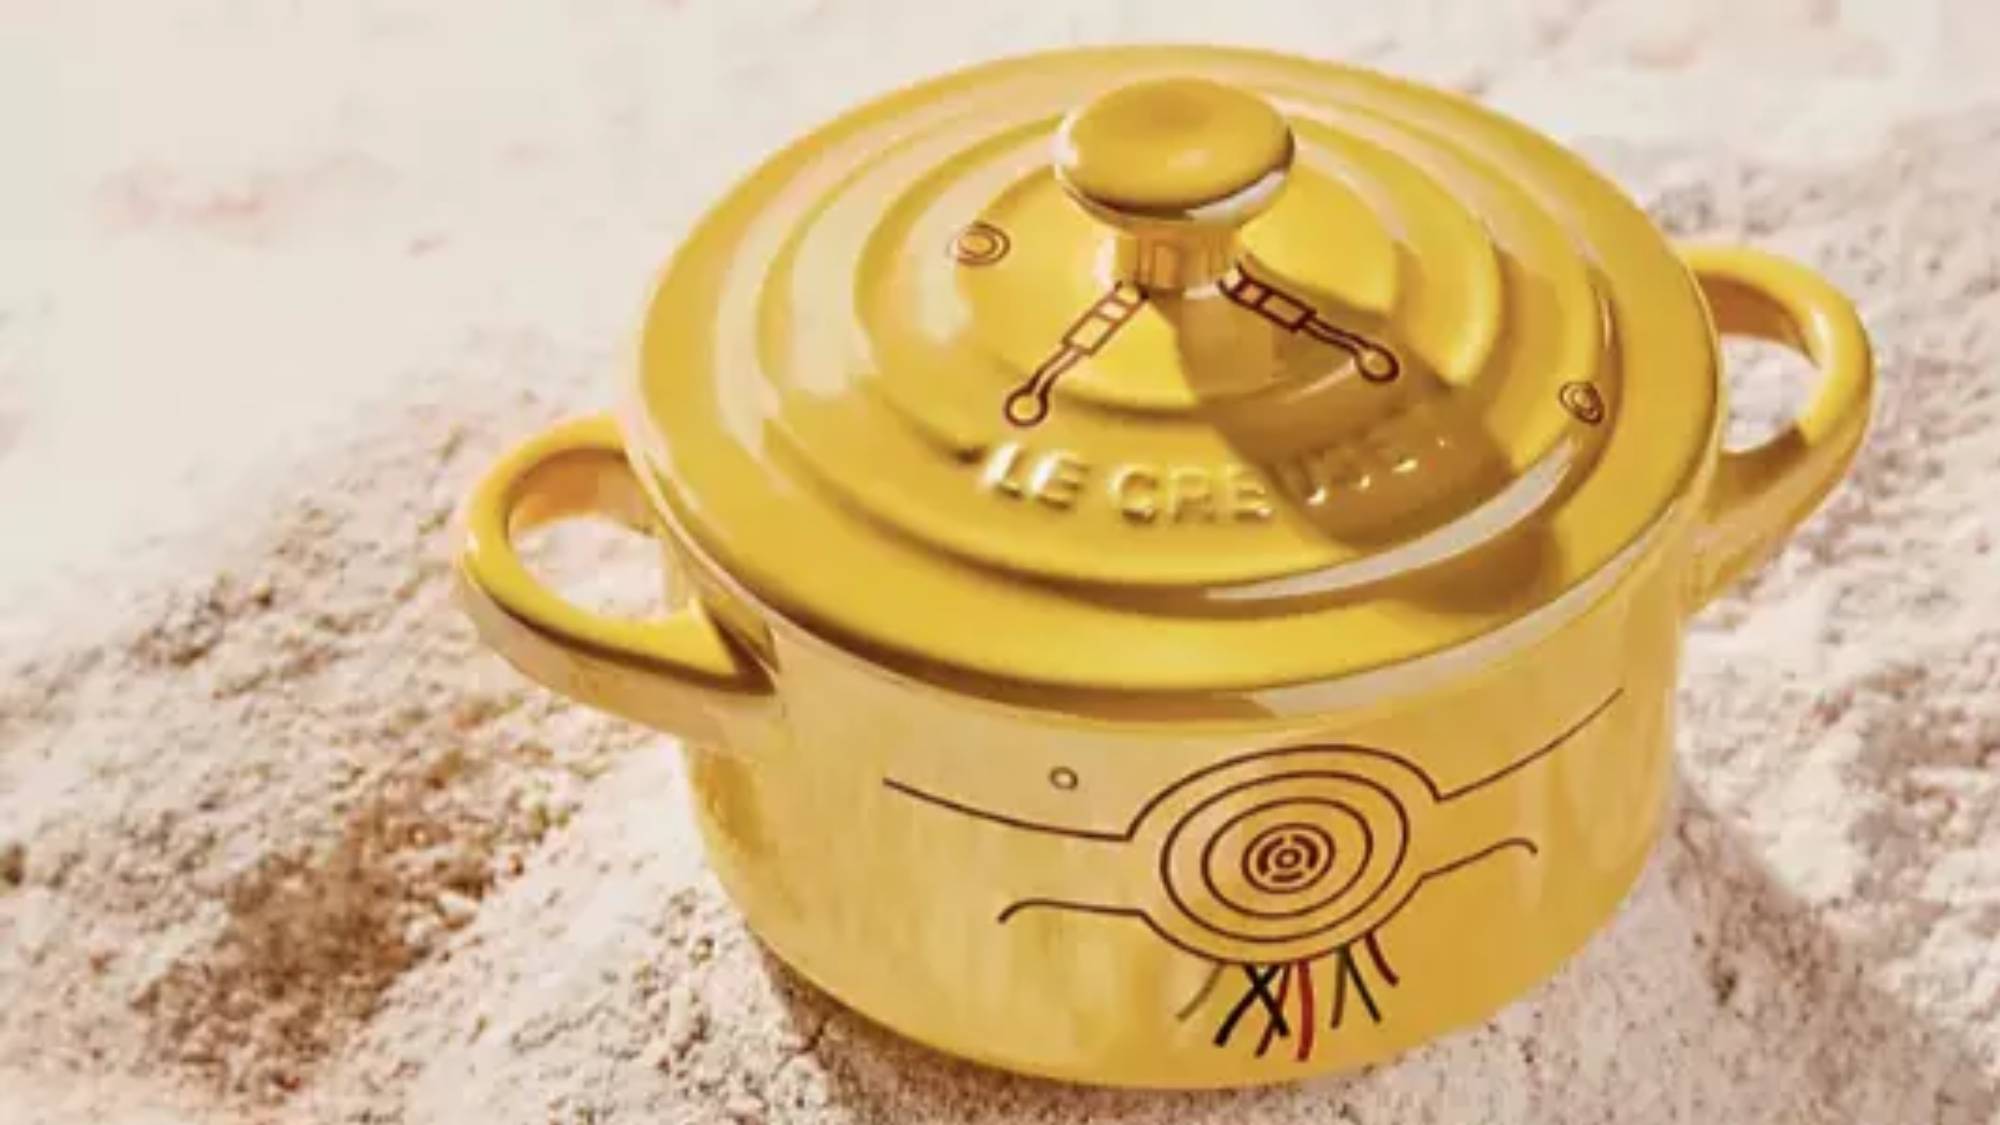 Le Creuset unveiled a Star Wars and you're going to want everything | Marie Claire